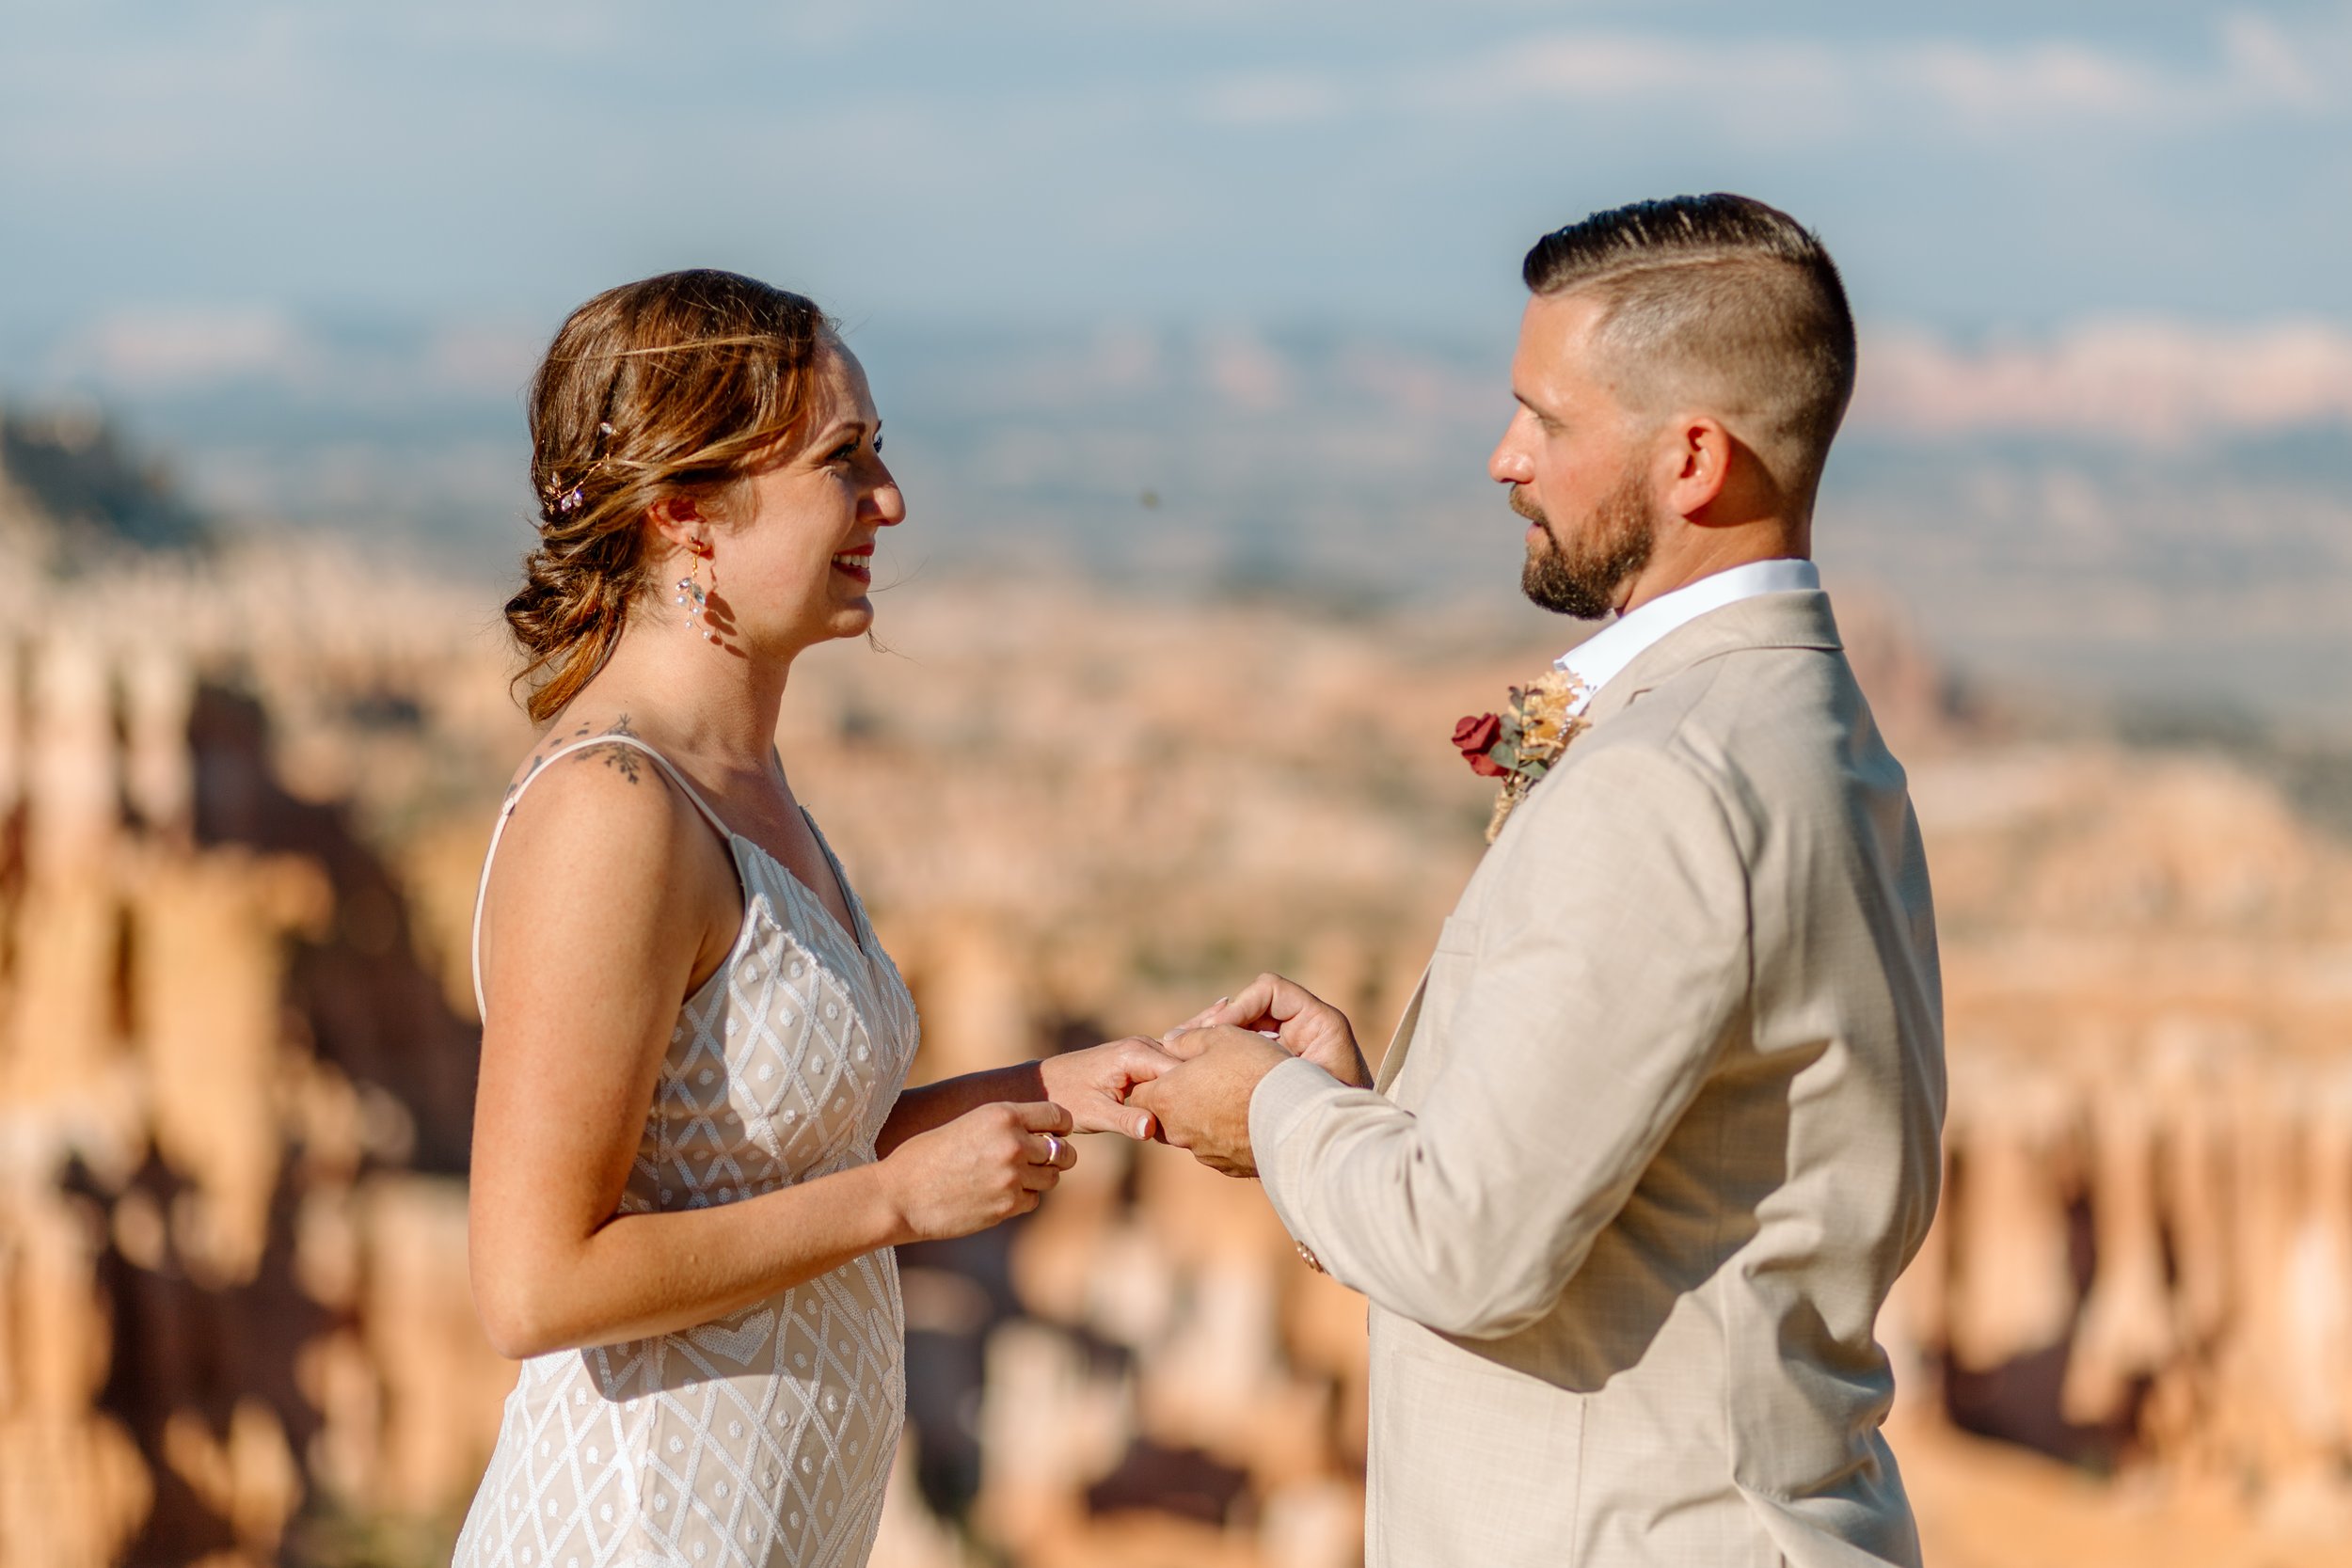  couple exchanges rings during utah elopement ceremony 